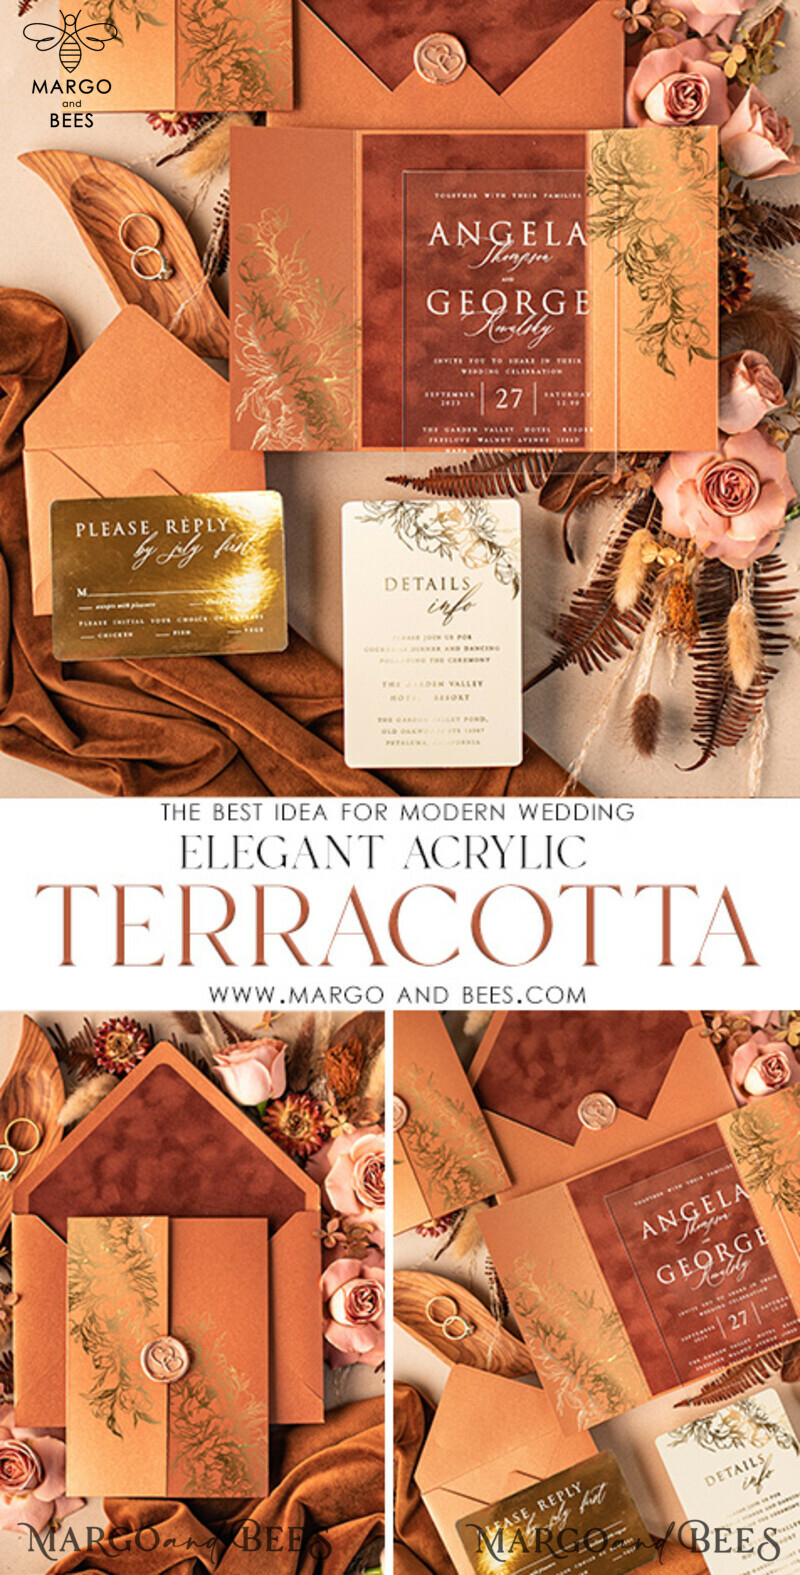 Introducing Luxurious Bespoke Acrylic Gold Wedding Invitations with Glamour Velvet Terracotta Touch and Golden Shine Plexi Suite. Complete Your Wedding with Exquisite Luxury Wedding Cards featuring a Wax Seal in Copper.-2